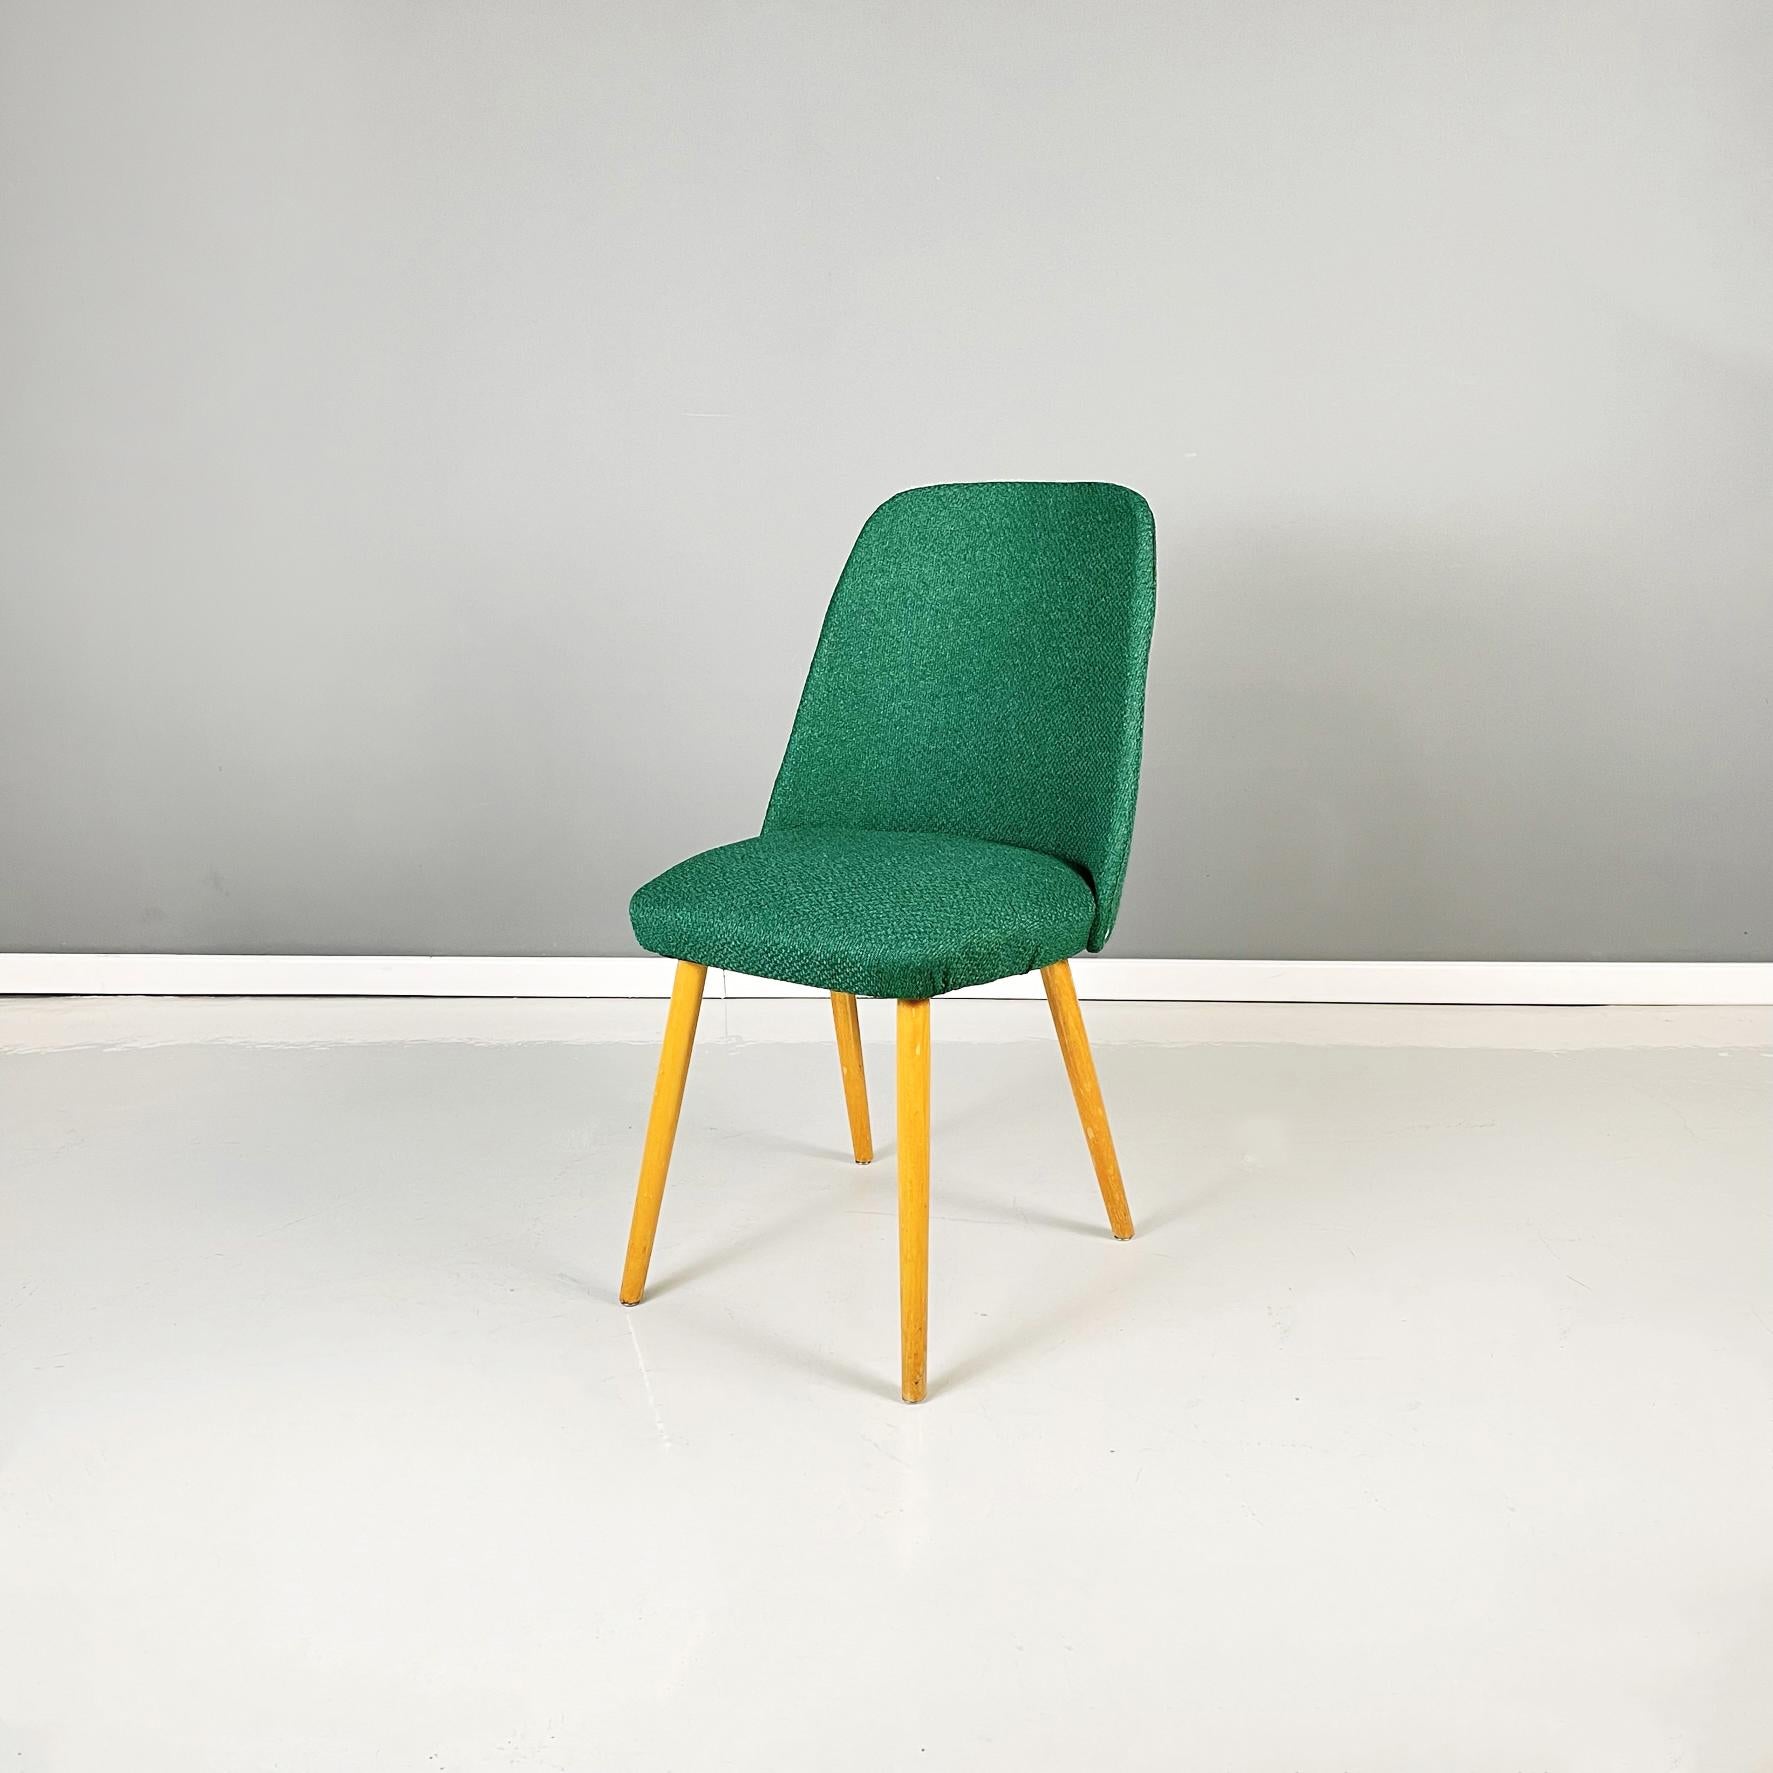 Italian Mid-Century Modern chairs in forest green fabric and wood, 1960s.
Set of 4 Classic and elegant chairs with seat and slightly curved back upholstered in forest green fabric. At the base of the back there are round metal inserts. Legs with